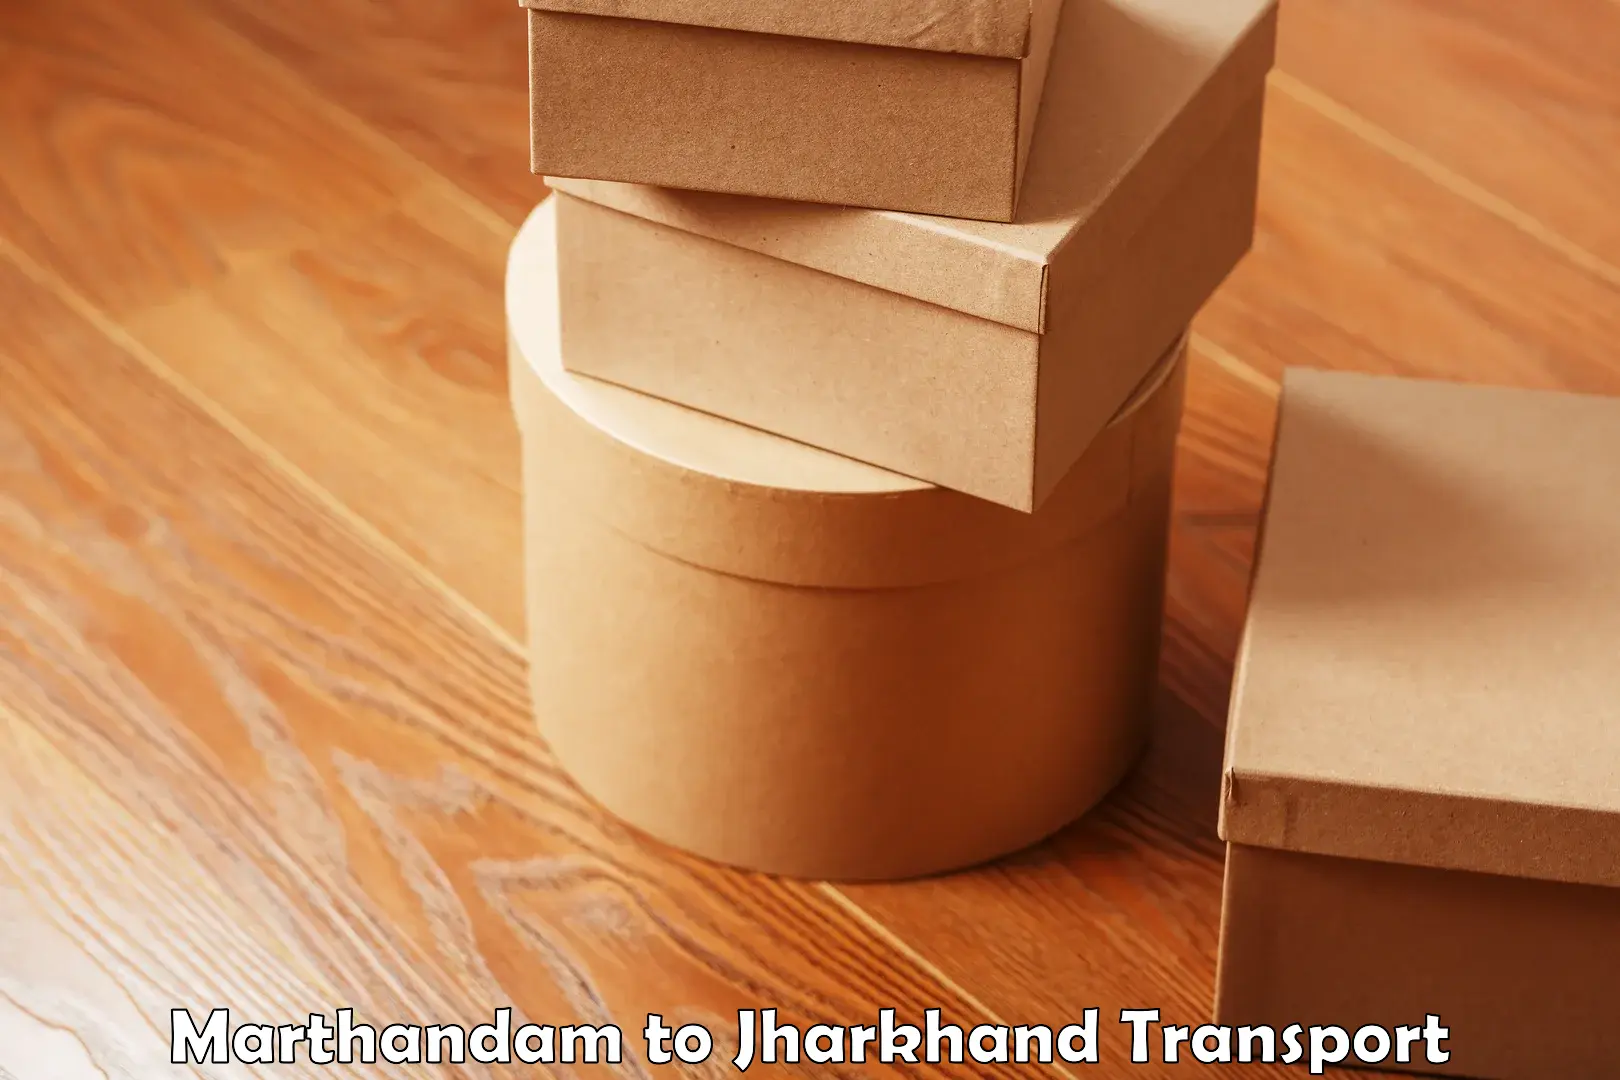 Container transport service Marthandam to Jharia